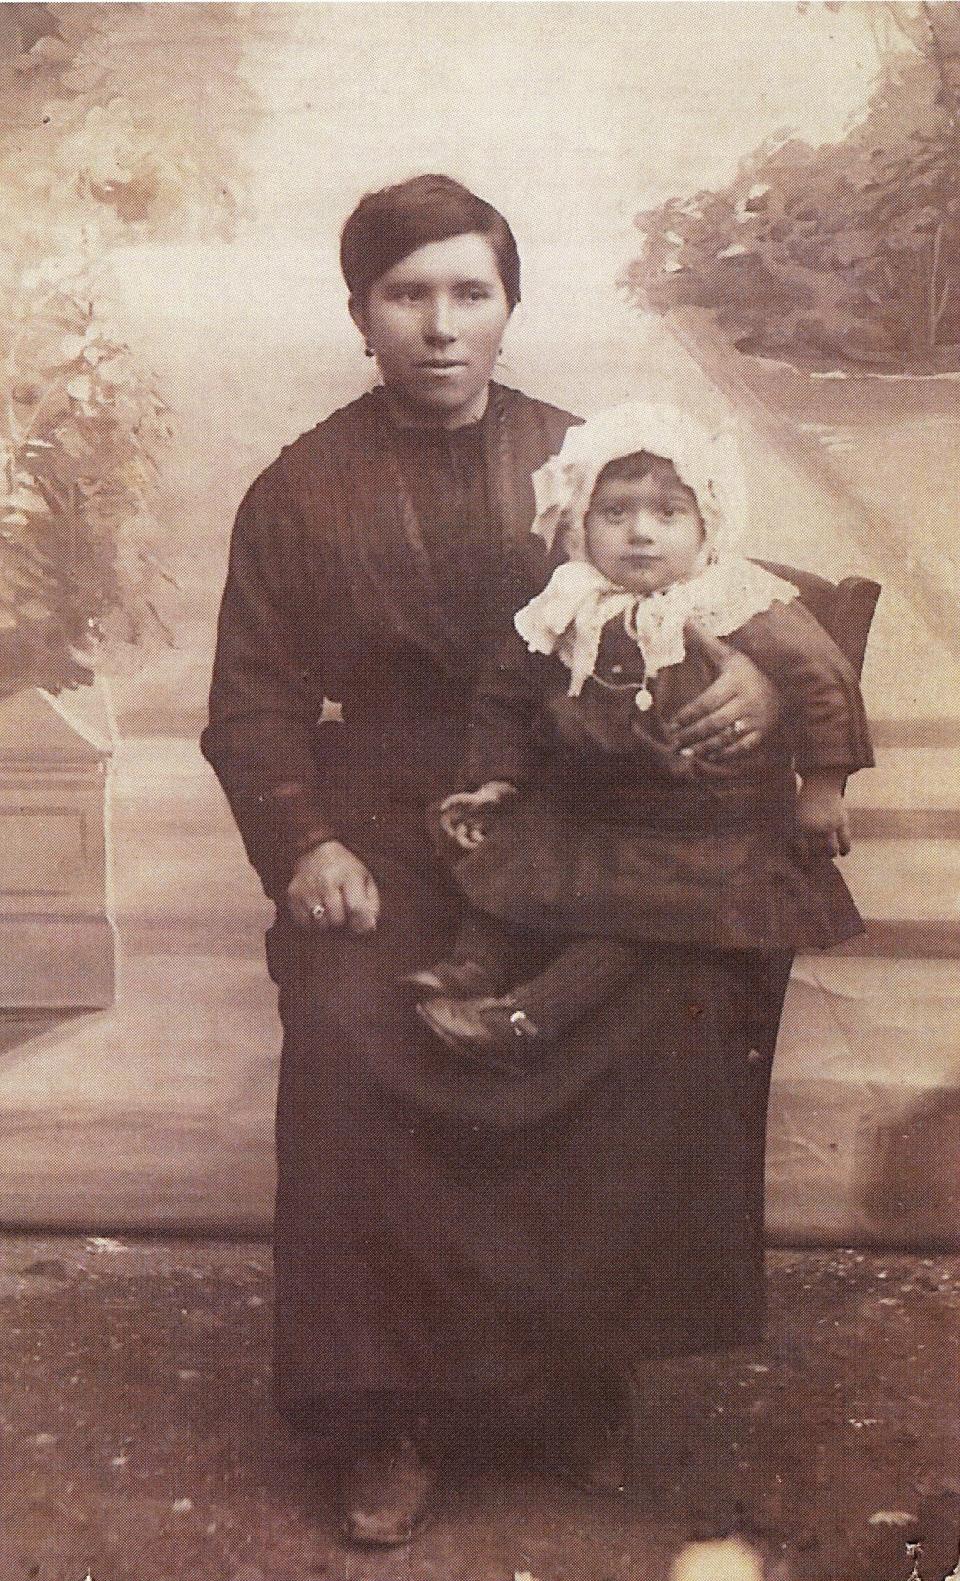 Rosa Moroncelli Bizzocchi (1883-1980) holds her oldest child, Maria Carolina Bizzocchi (1909-2006), in this circa 1909-1910 photo from the Portsmouth Athenaeum's North End Neighborhood Collection.